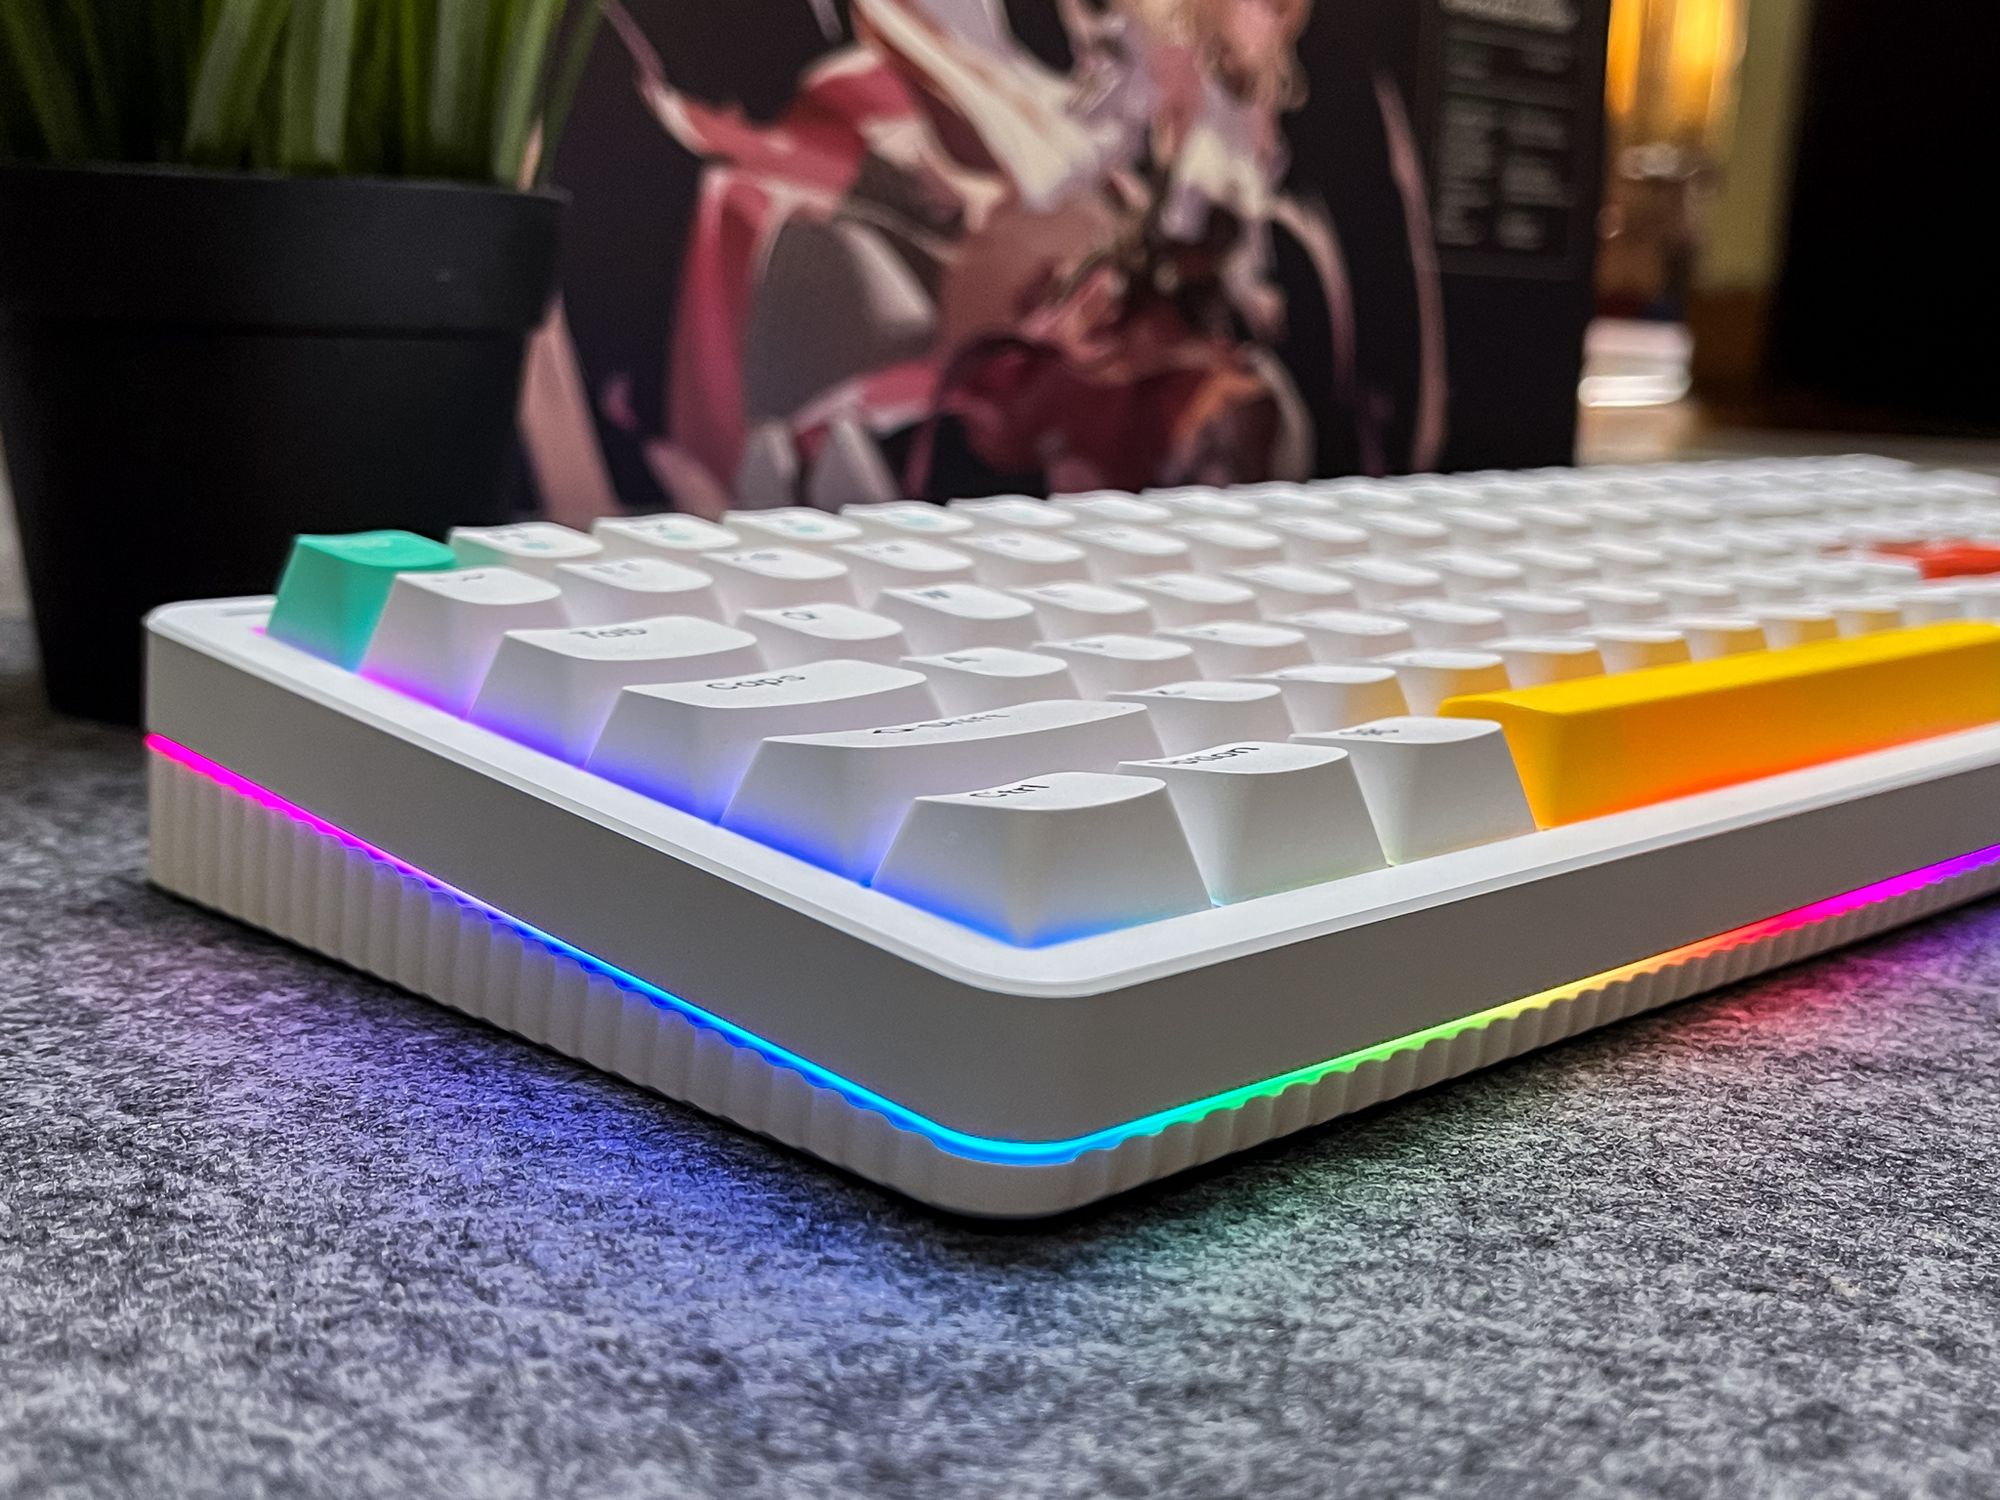 NuPhy Halo 96 Keyboard Review: Is it any good?